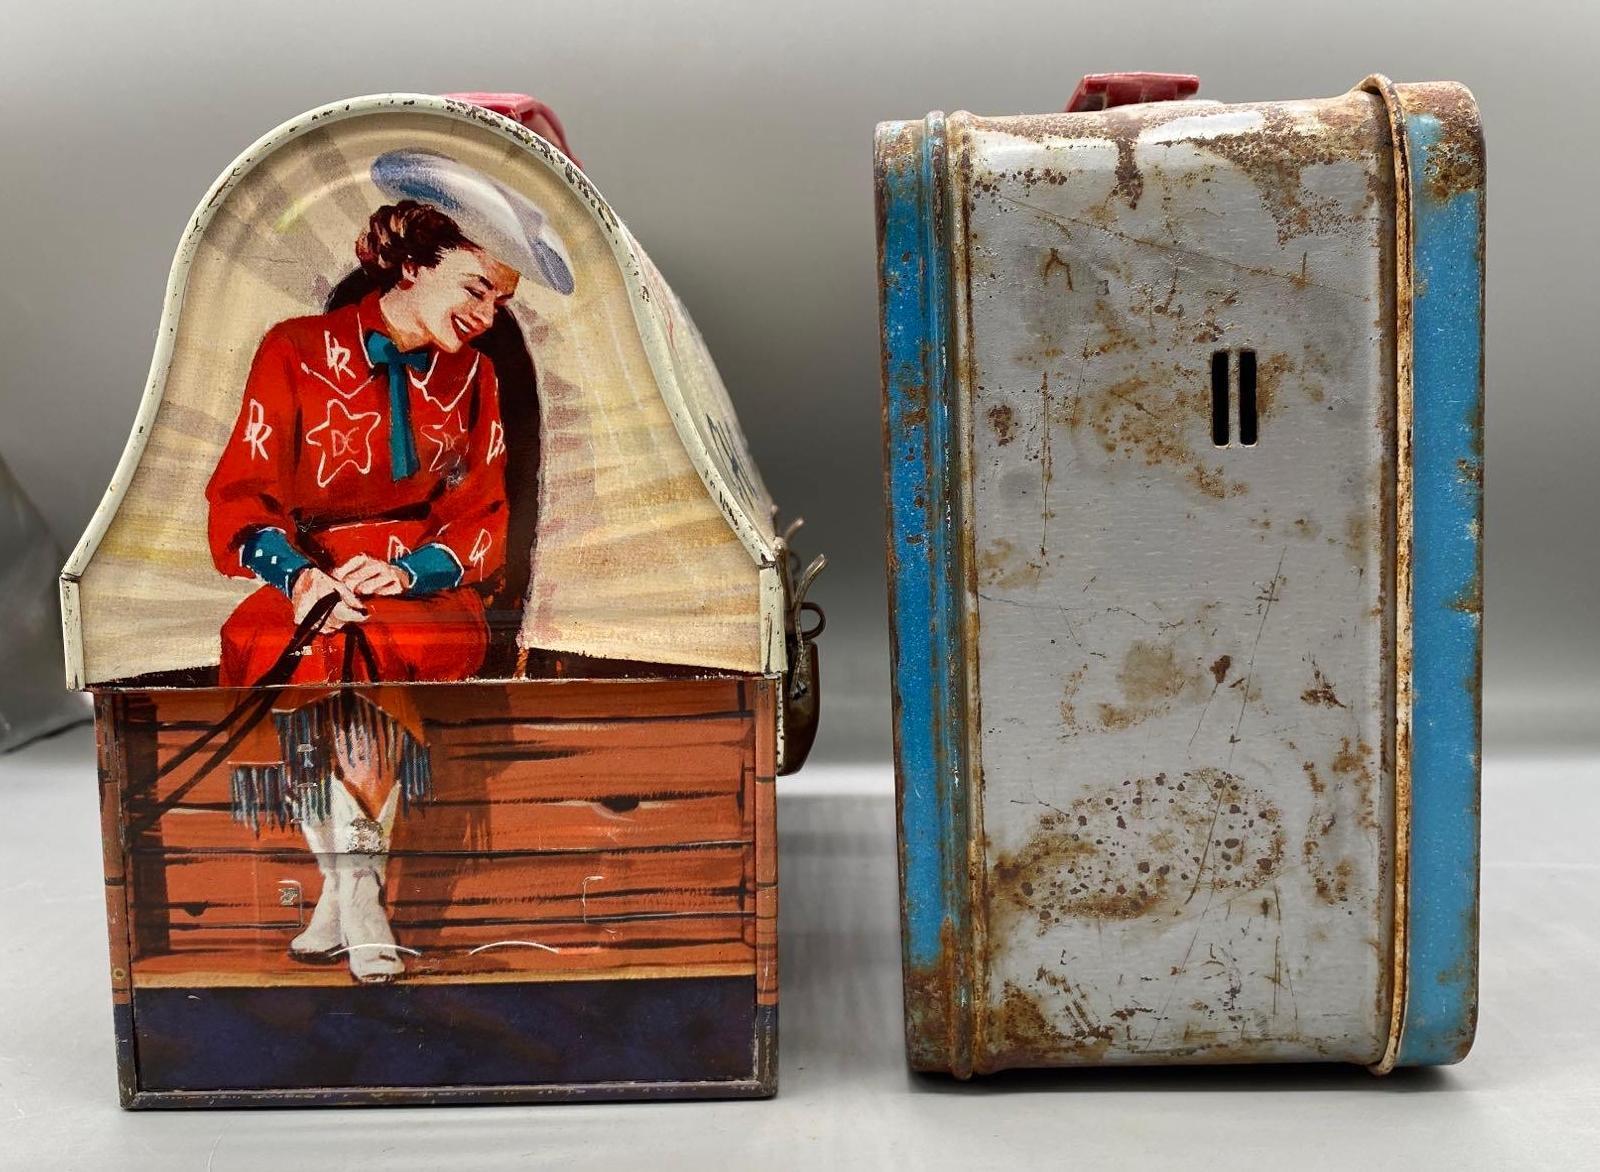 Two Roy Rogers & Dale Evans Lunch Box